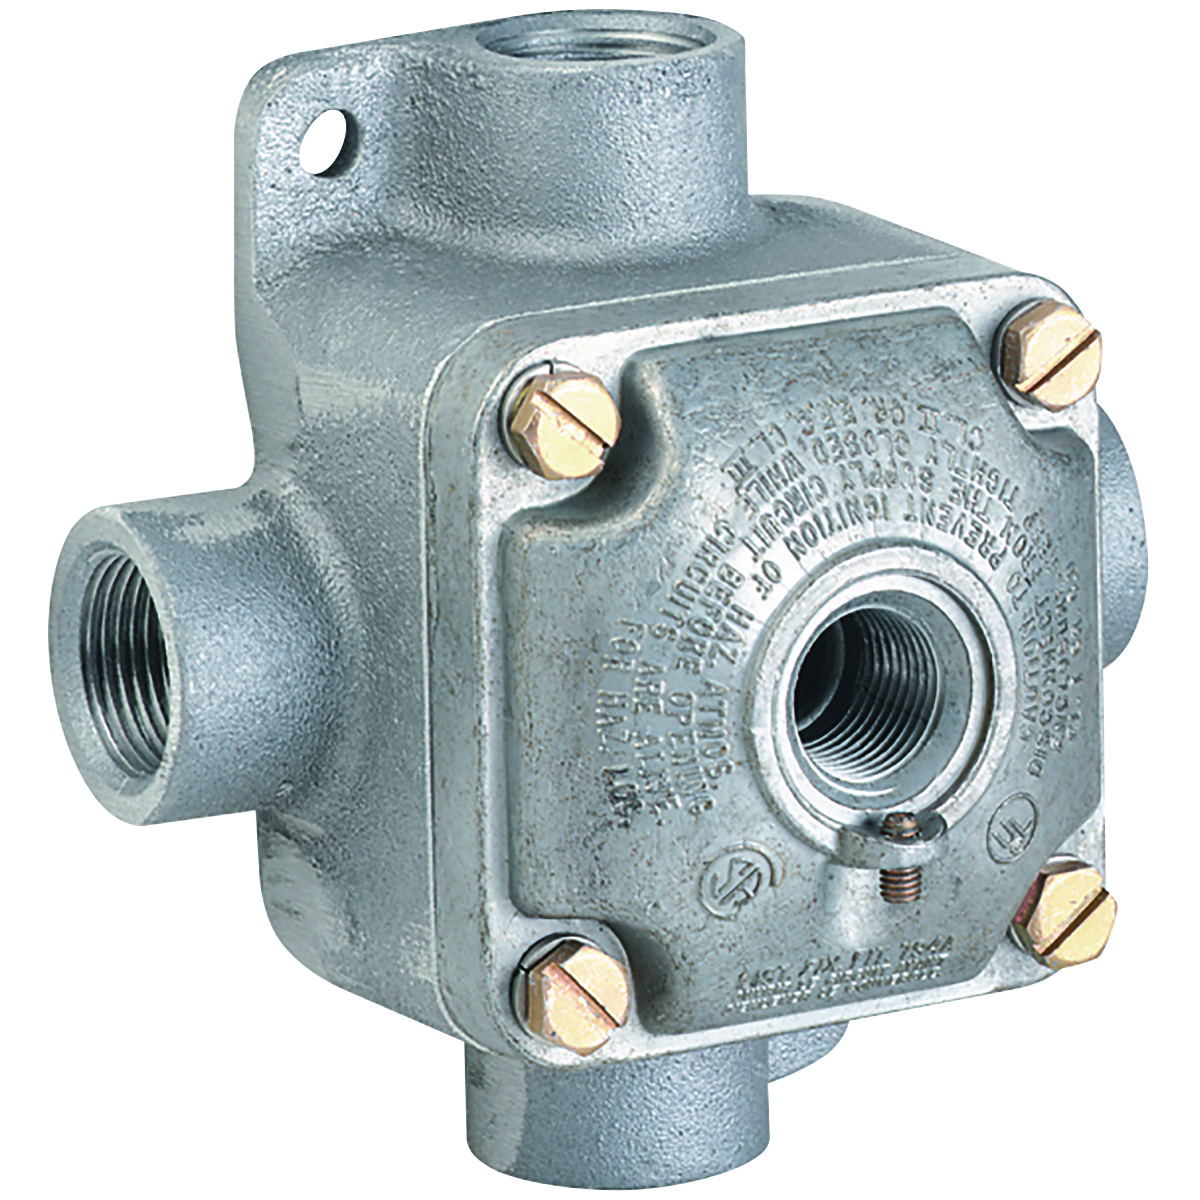 JL SERIES - ALUMINUM OUTLET BODY WITH HUB COVER - X TYPE - HUB SIZE 1/2INCH (BOX HUB) AND 3/4 INCH (COVER HUB) - VOLUME 12.5 CUBIC INCHES